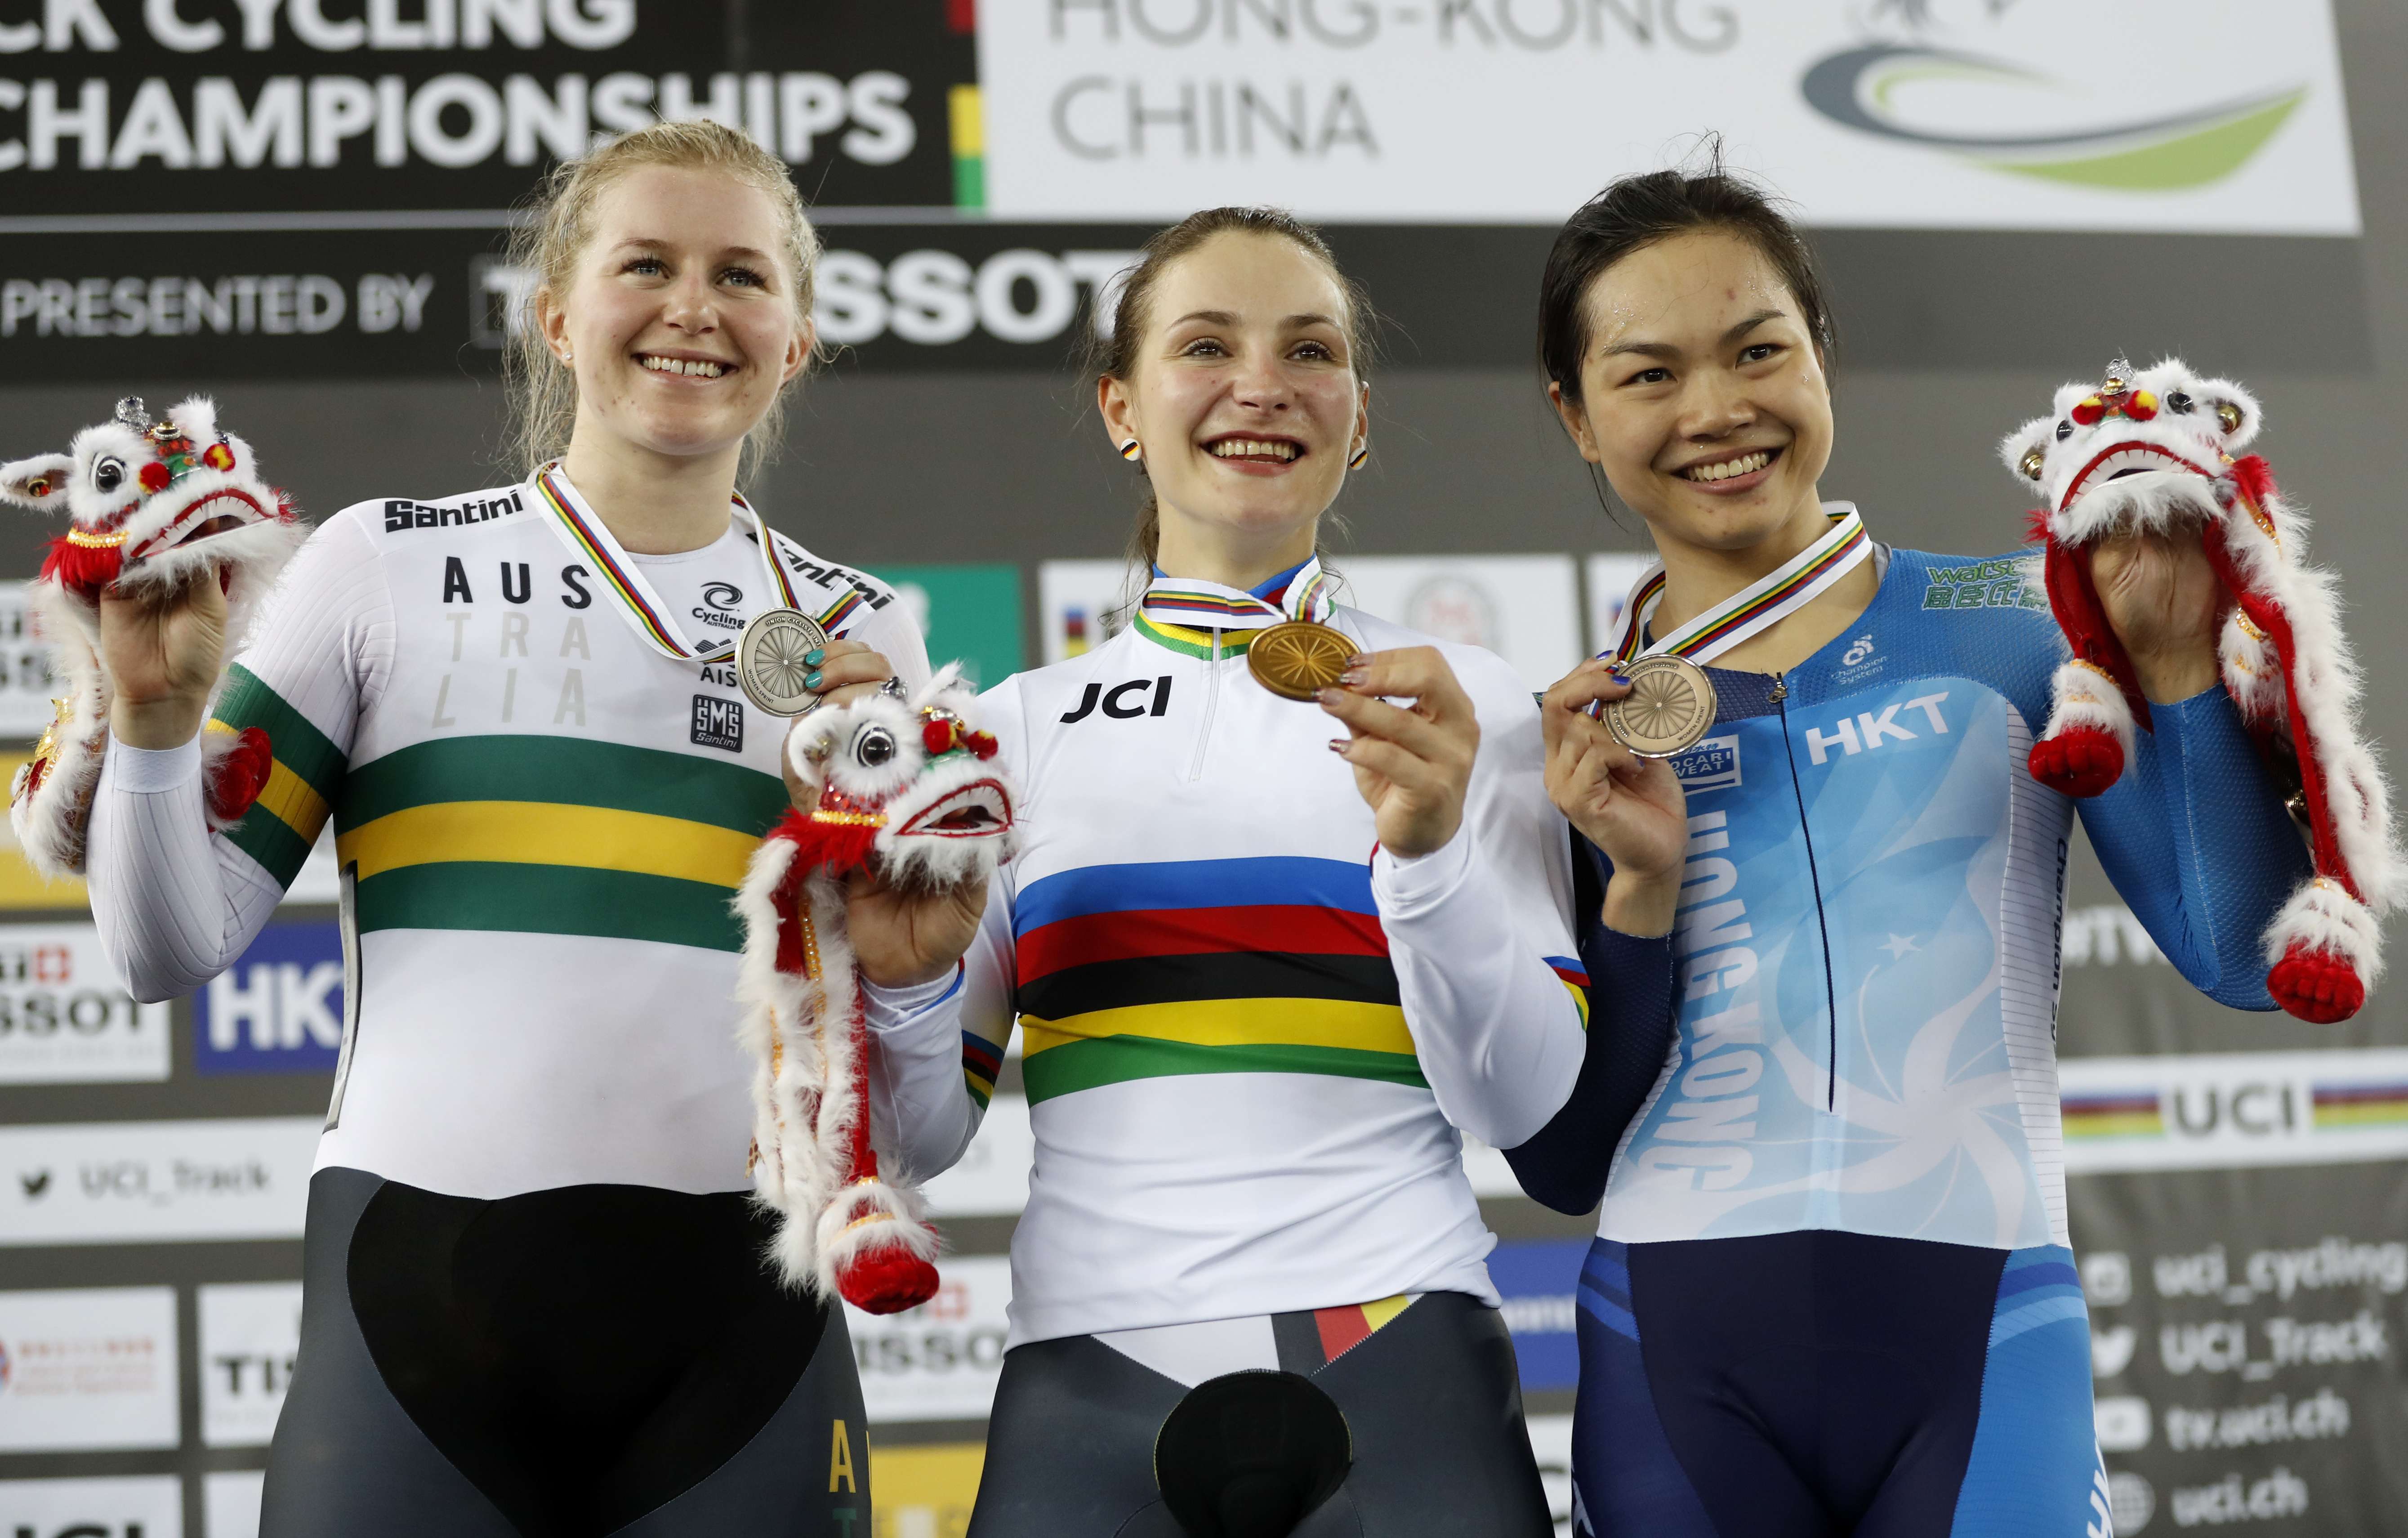 Hong Kong’s Sarah Lee celebrates her bronze medal with the sprint winner, Germany's Kristina Vogel (centre), and silver medallist Australia's Stephanie Morton at the UCI Track Cycling World Championships in Hong Kong. Photo: AP